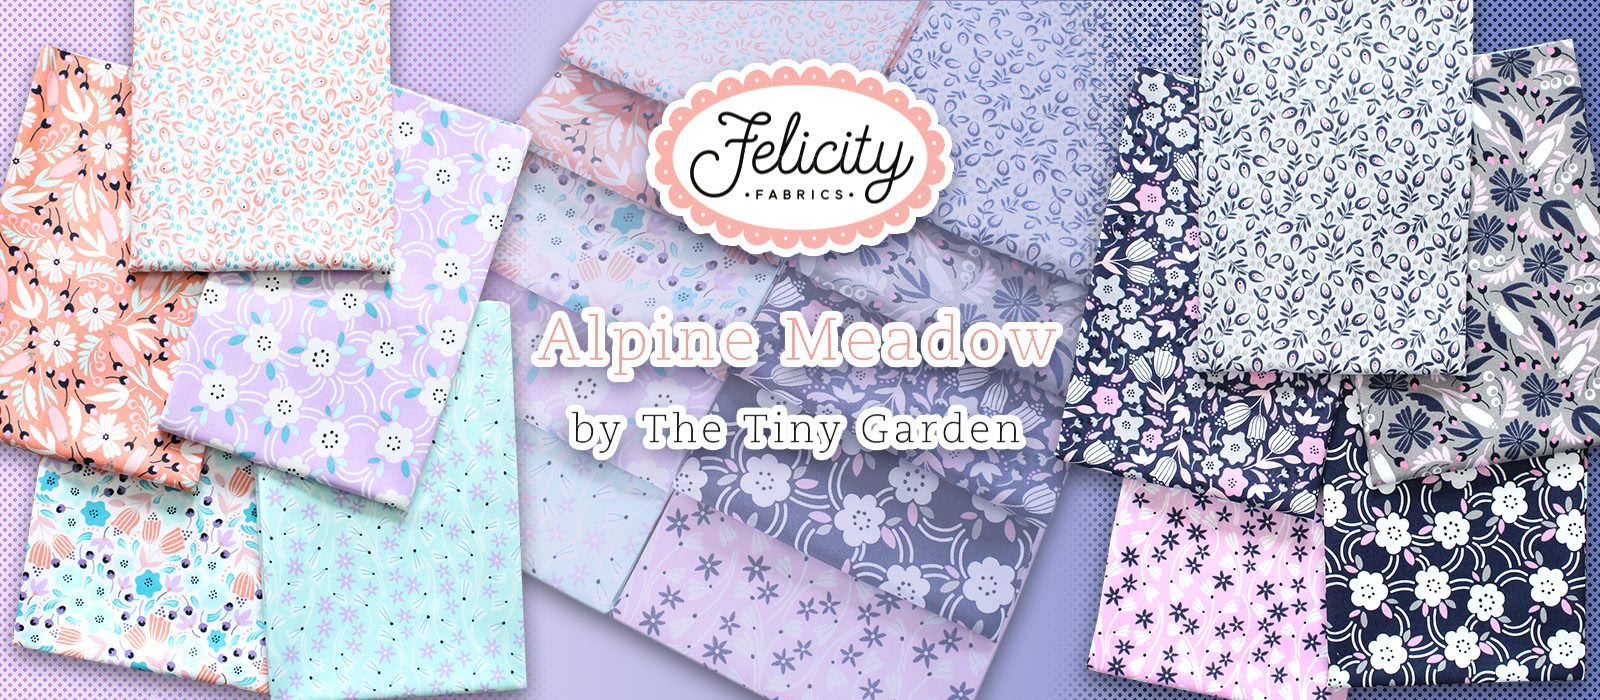 Felicity Fabrics Alpine Meadow Collection by The Tiny Garden